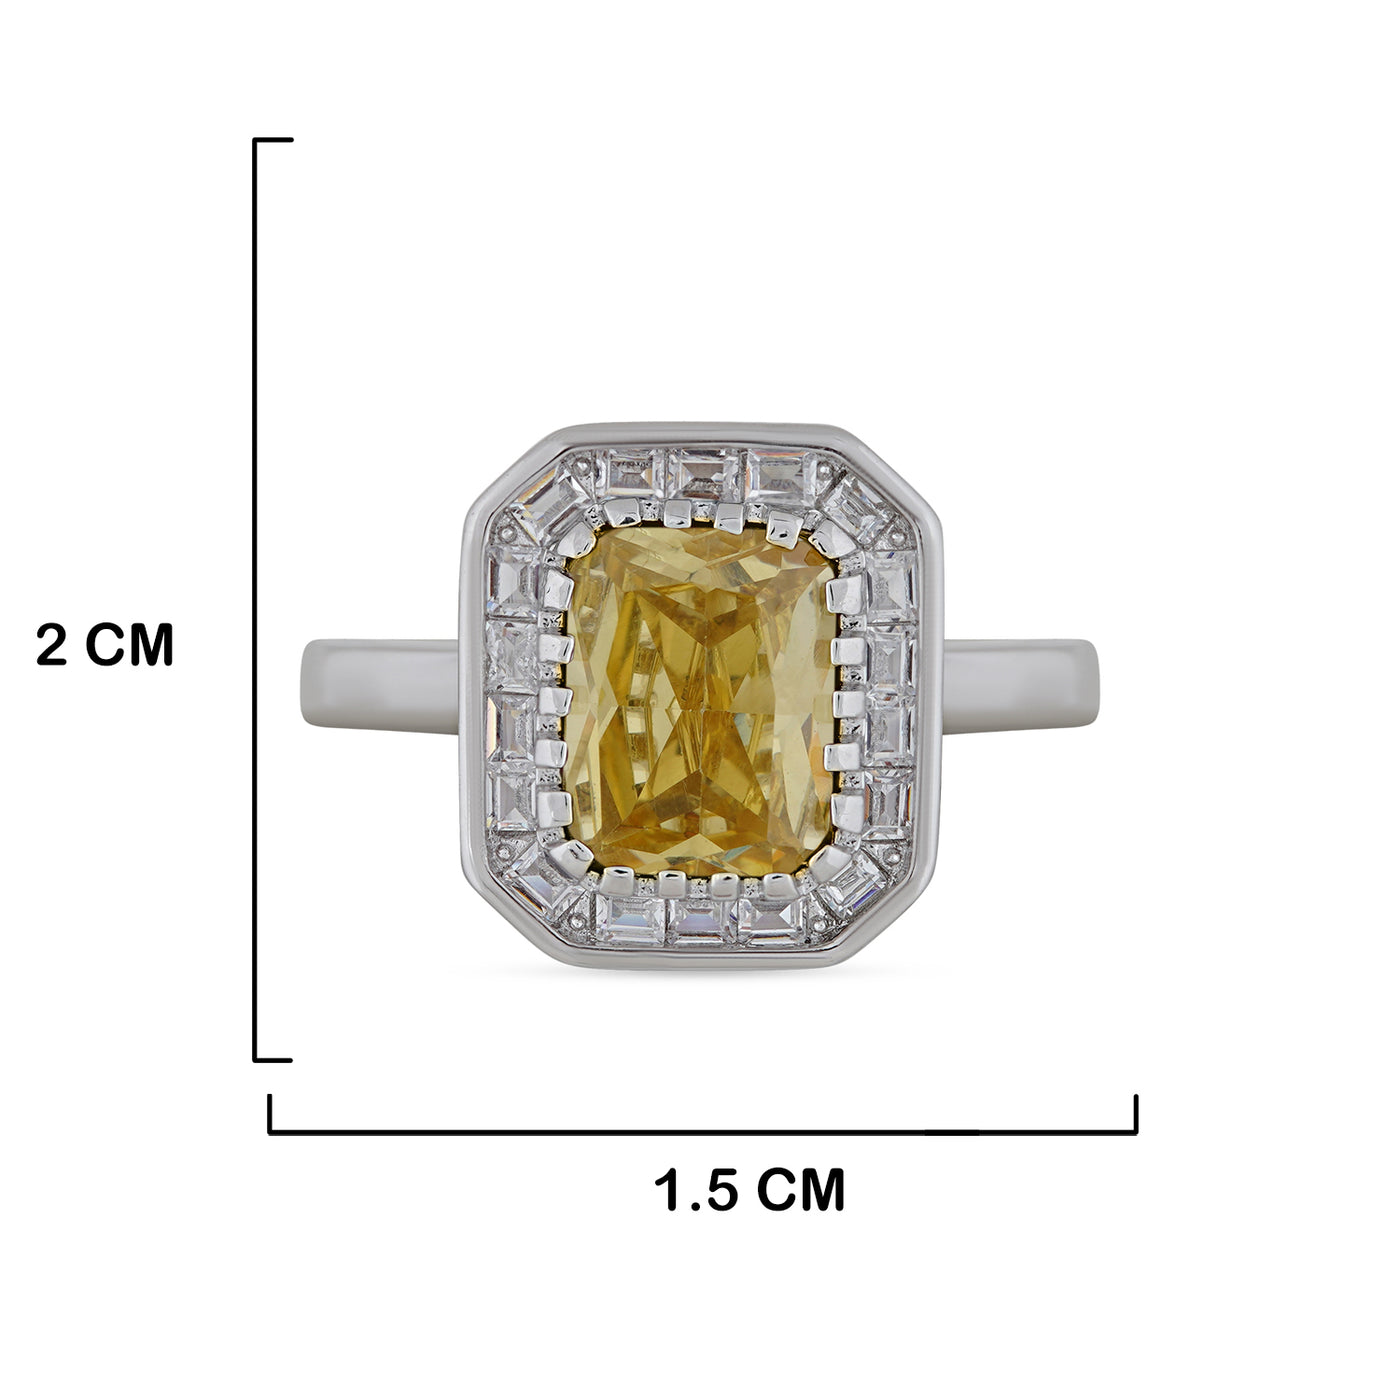 Cubic Zirconia Yellow Stone Ring with measurements in cm. 2cm by 1.5cm.